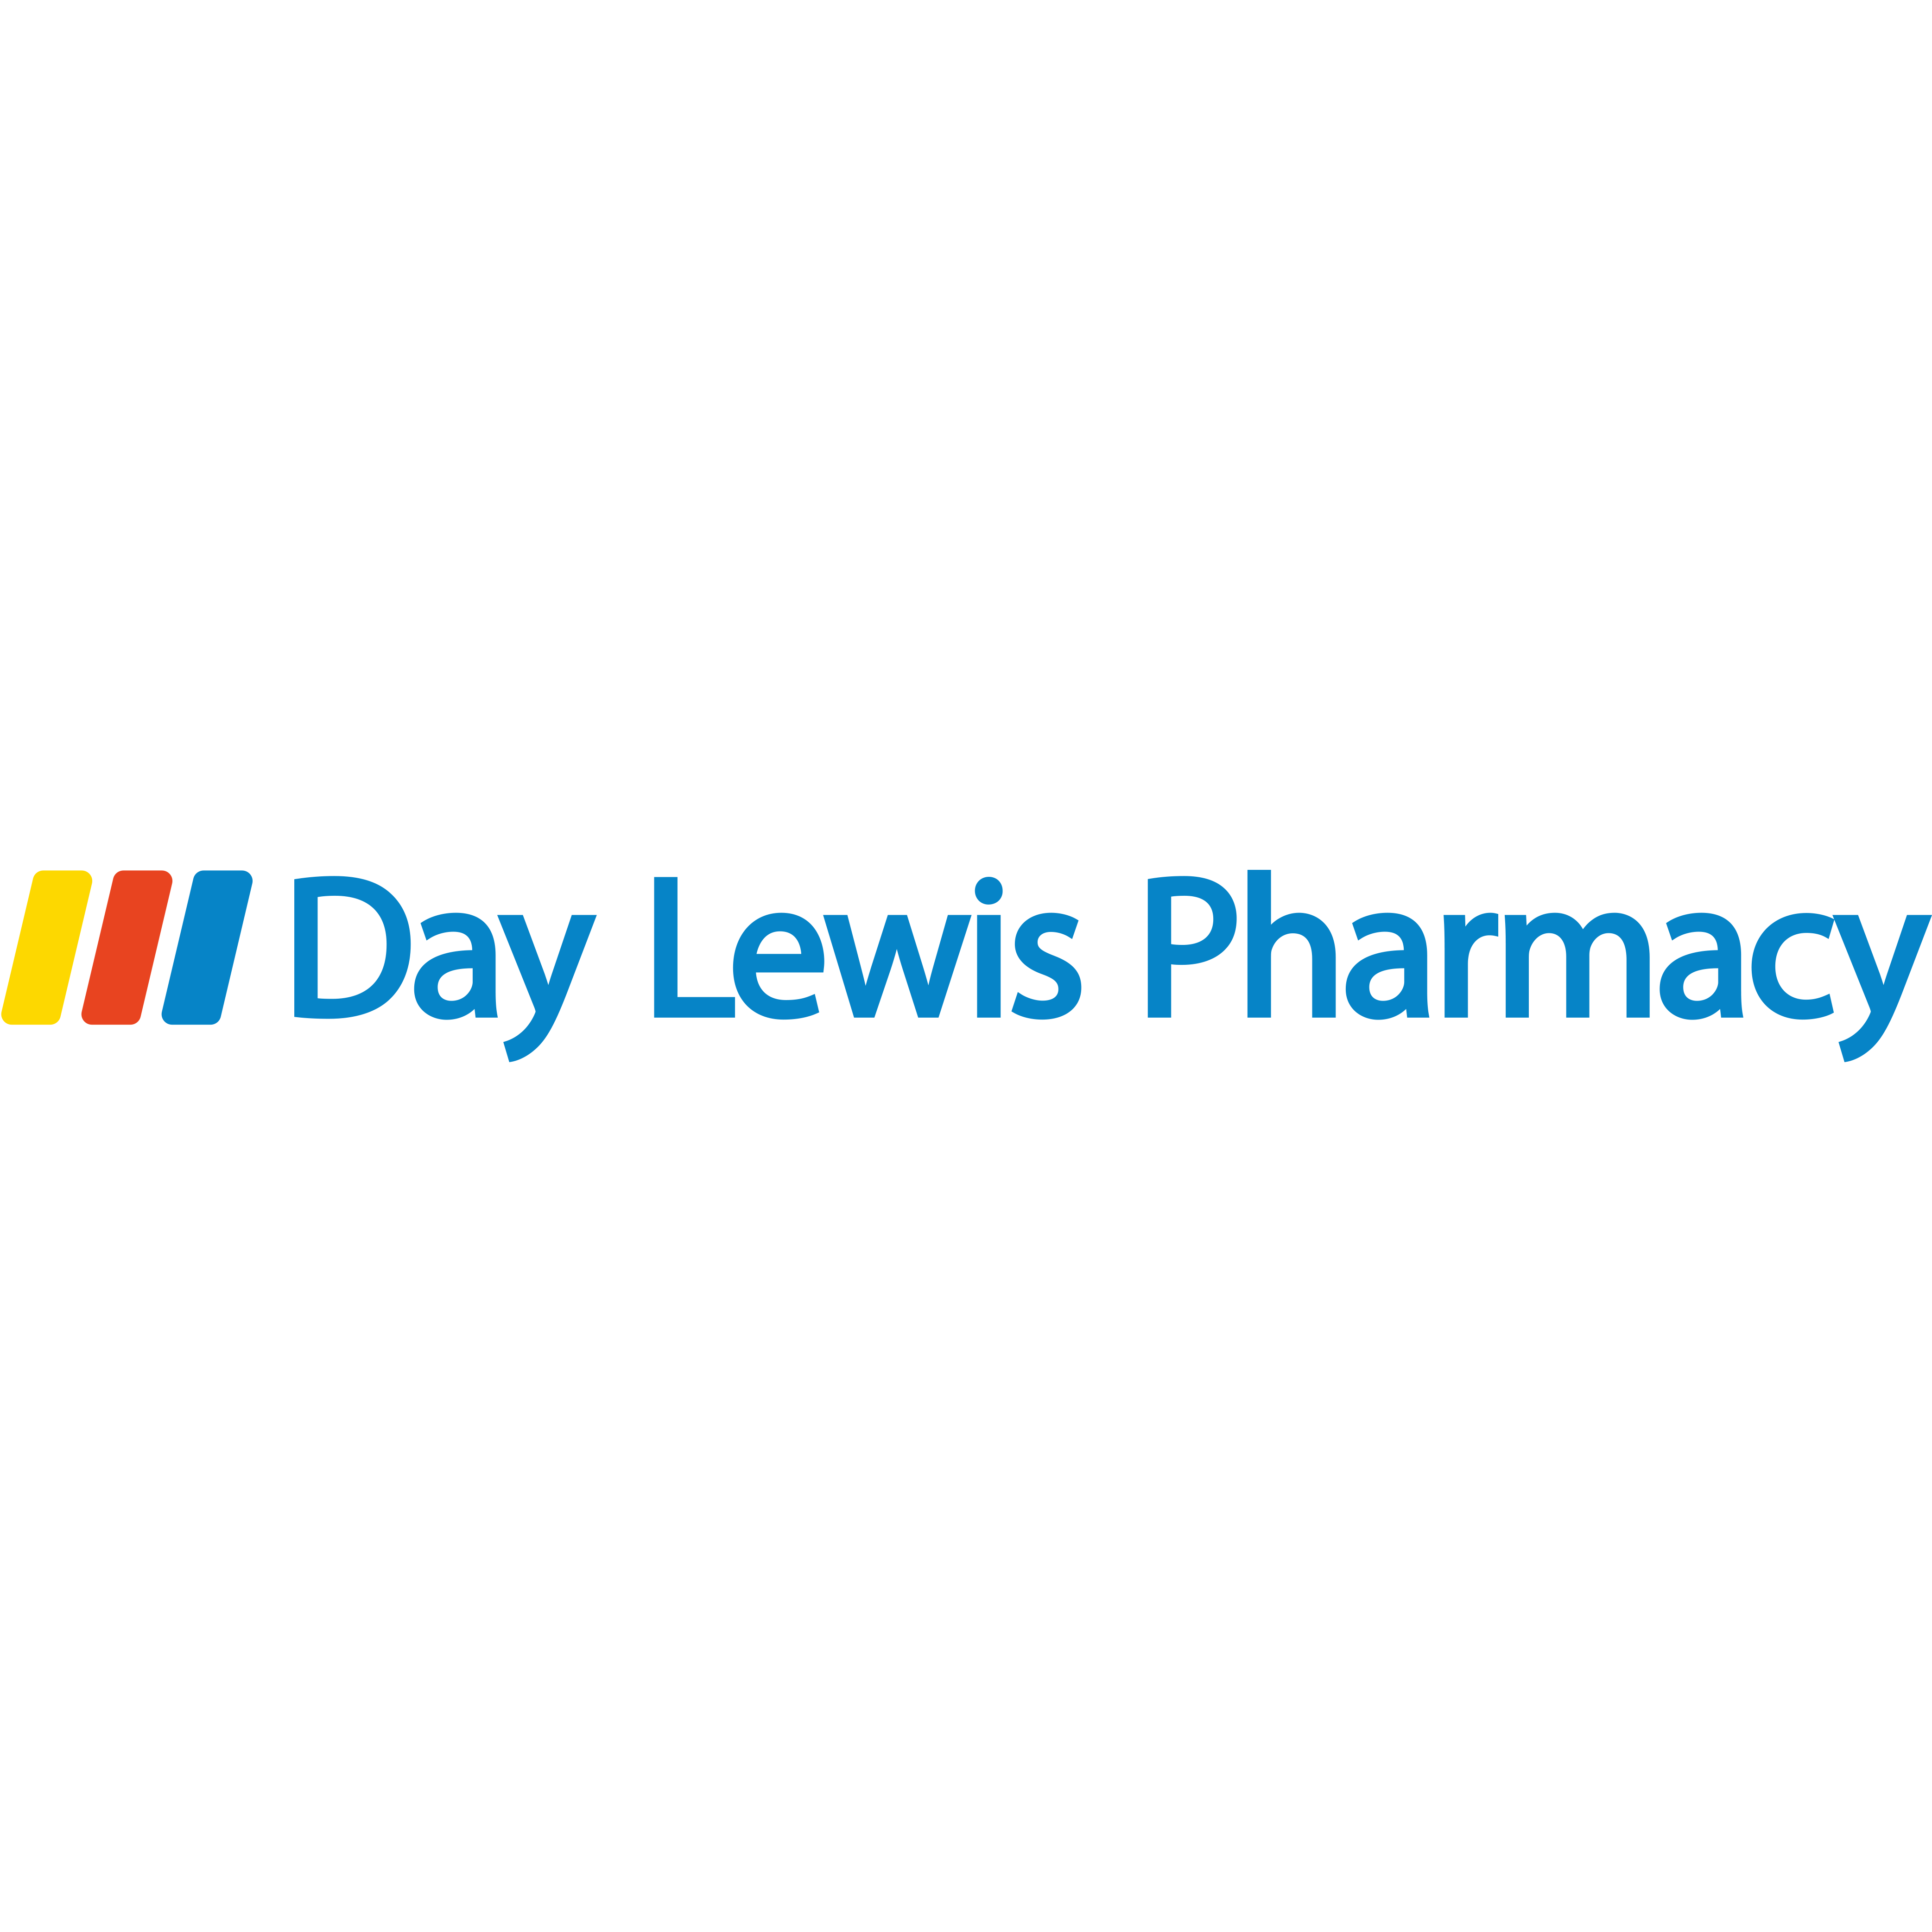 Day Lewis Pharmacy Haslemere Haslemere 01428 656143